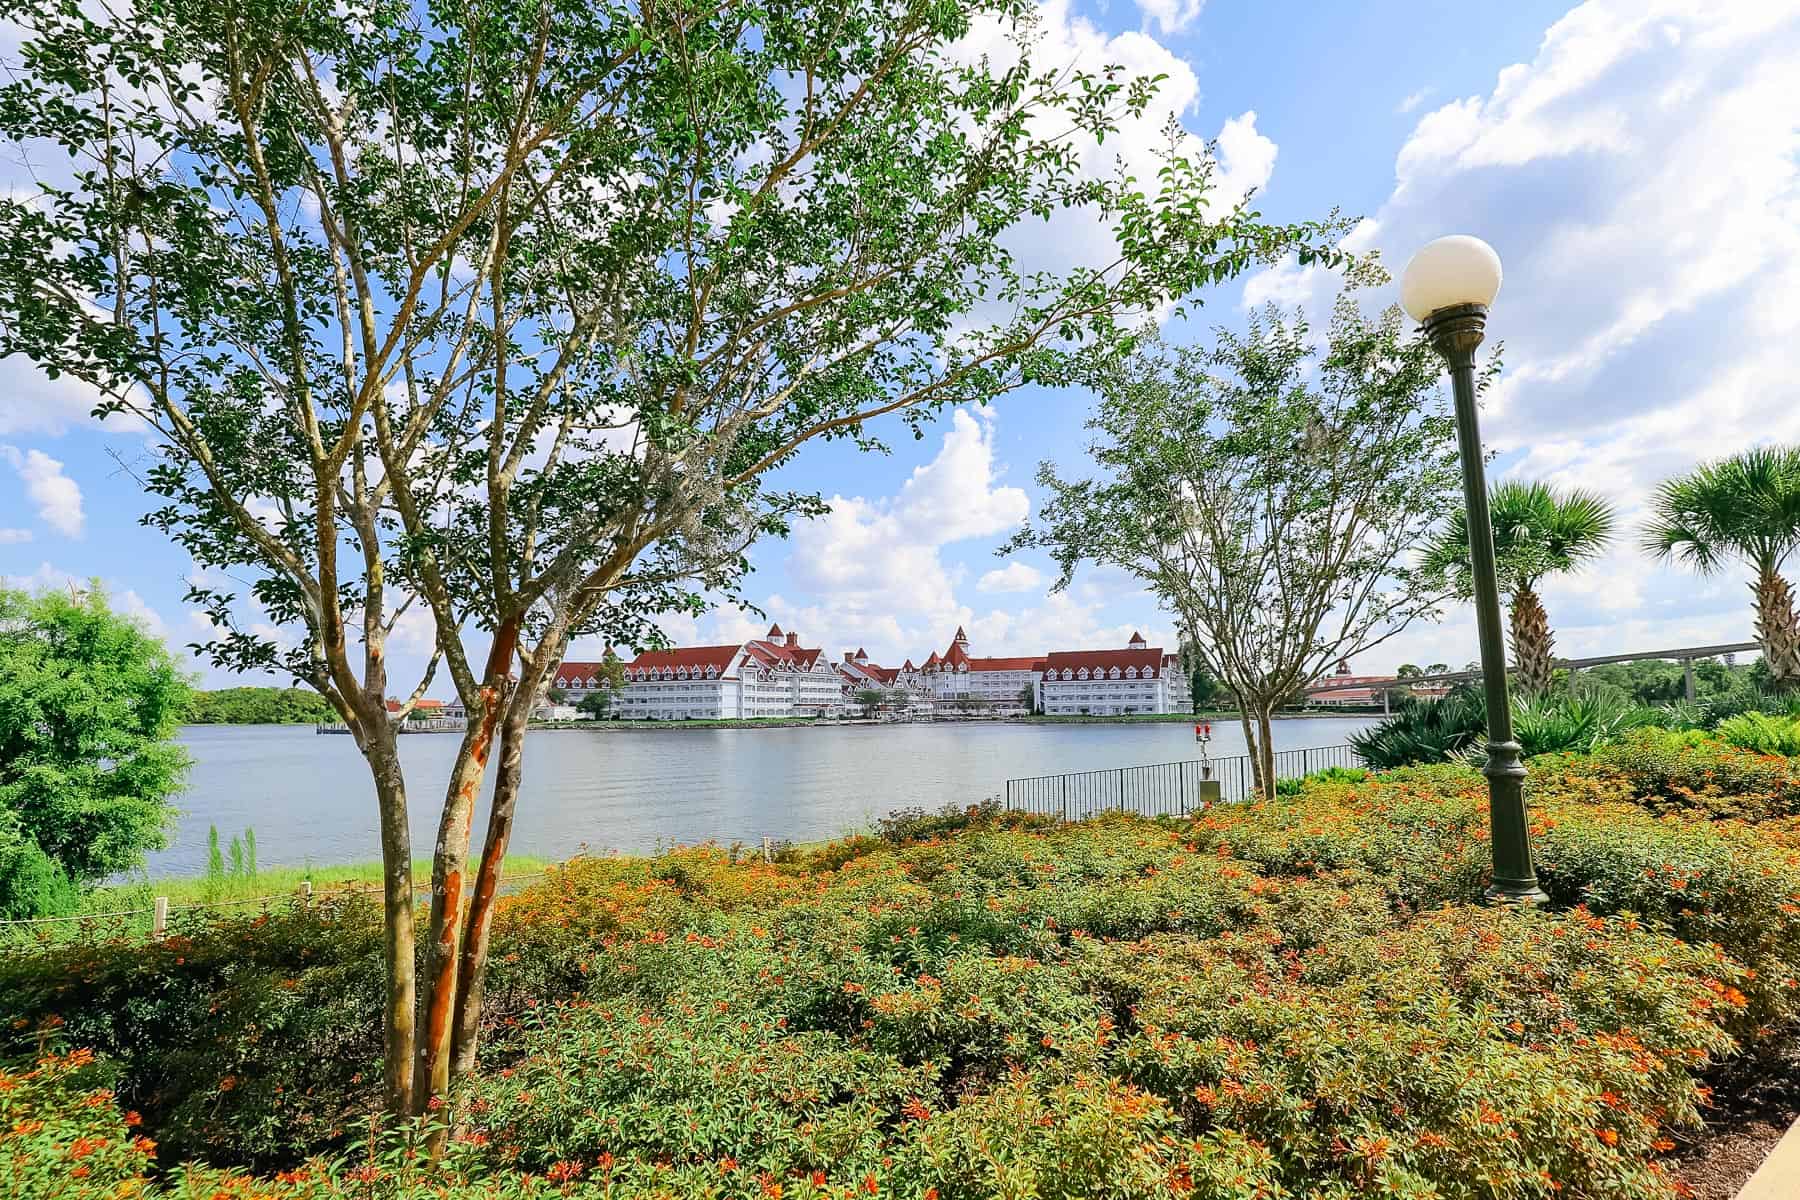 the Grand Floridian as seen from the walking path to Magic Kingdom